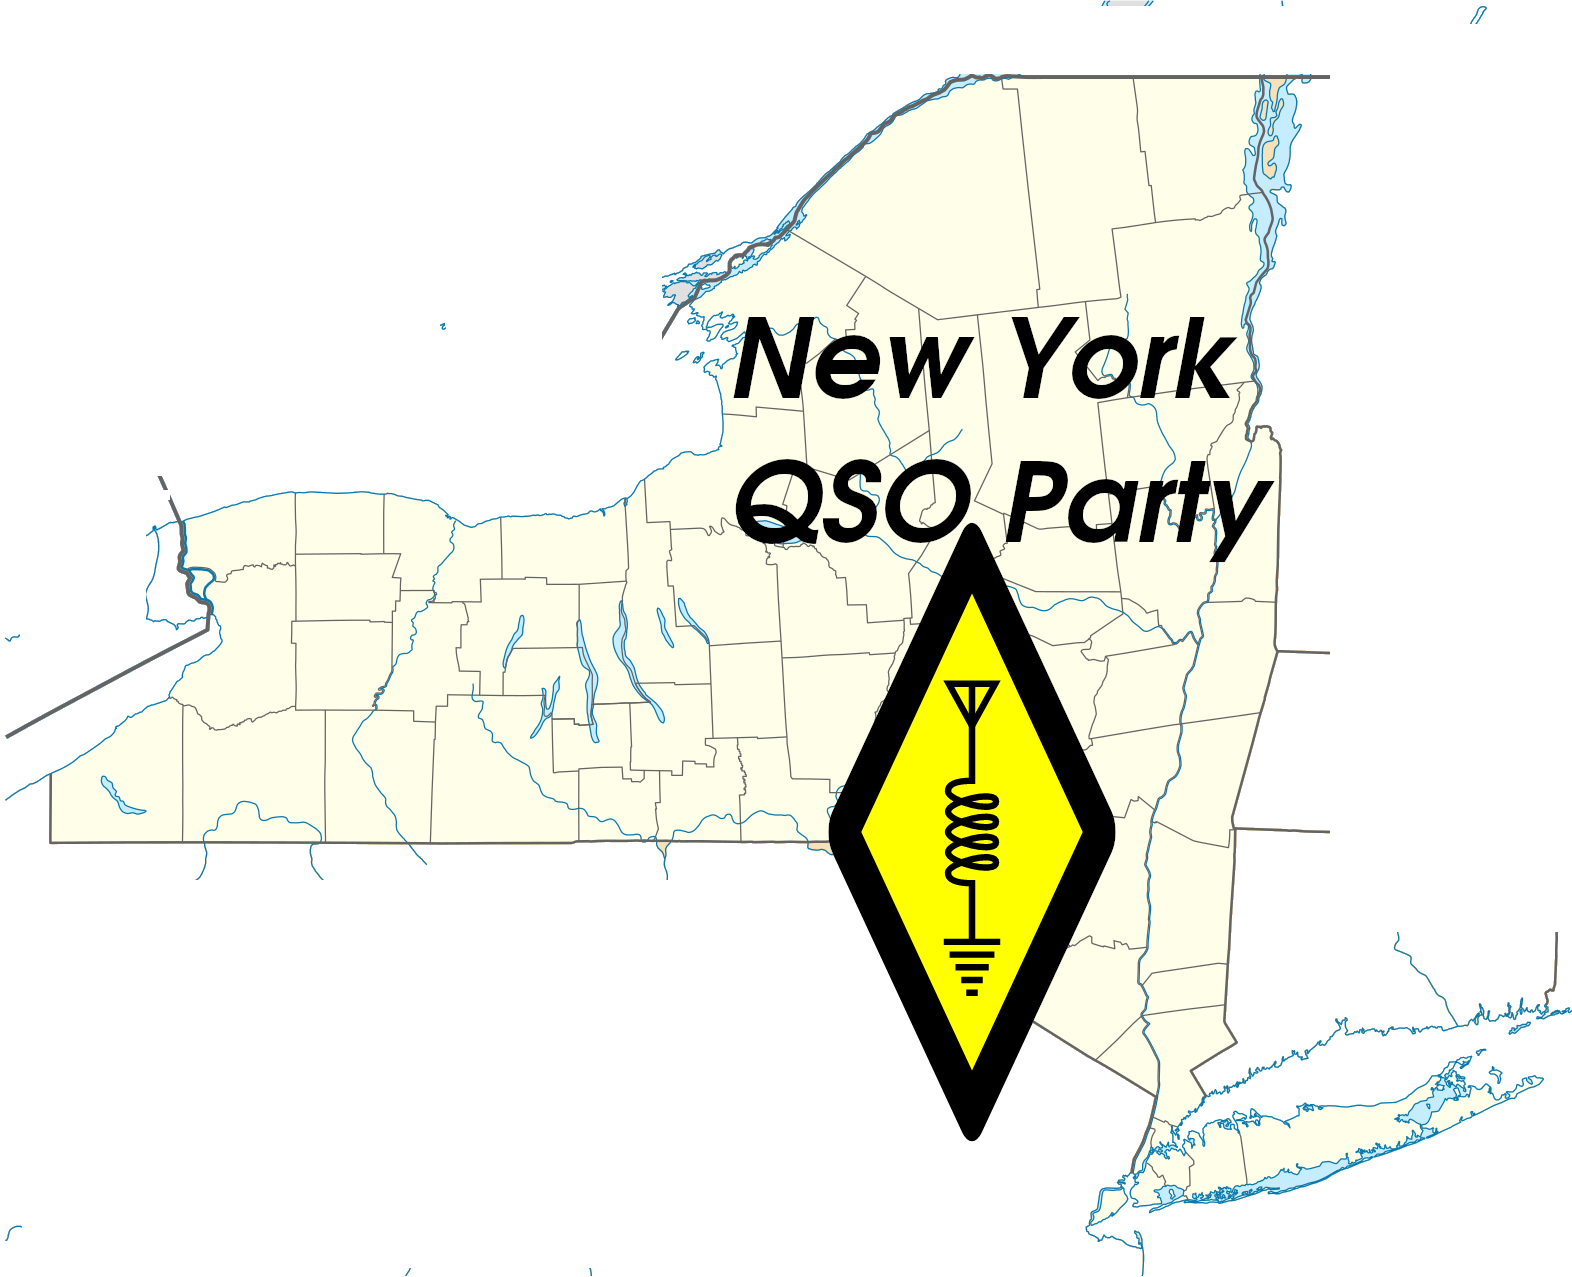 New York QSO Party